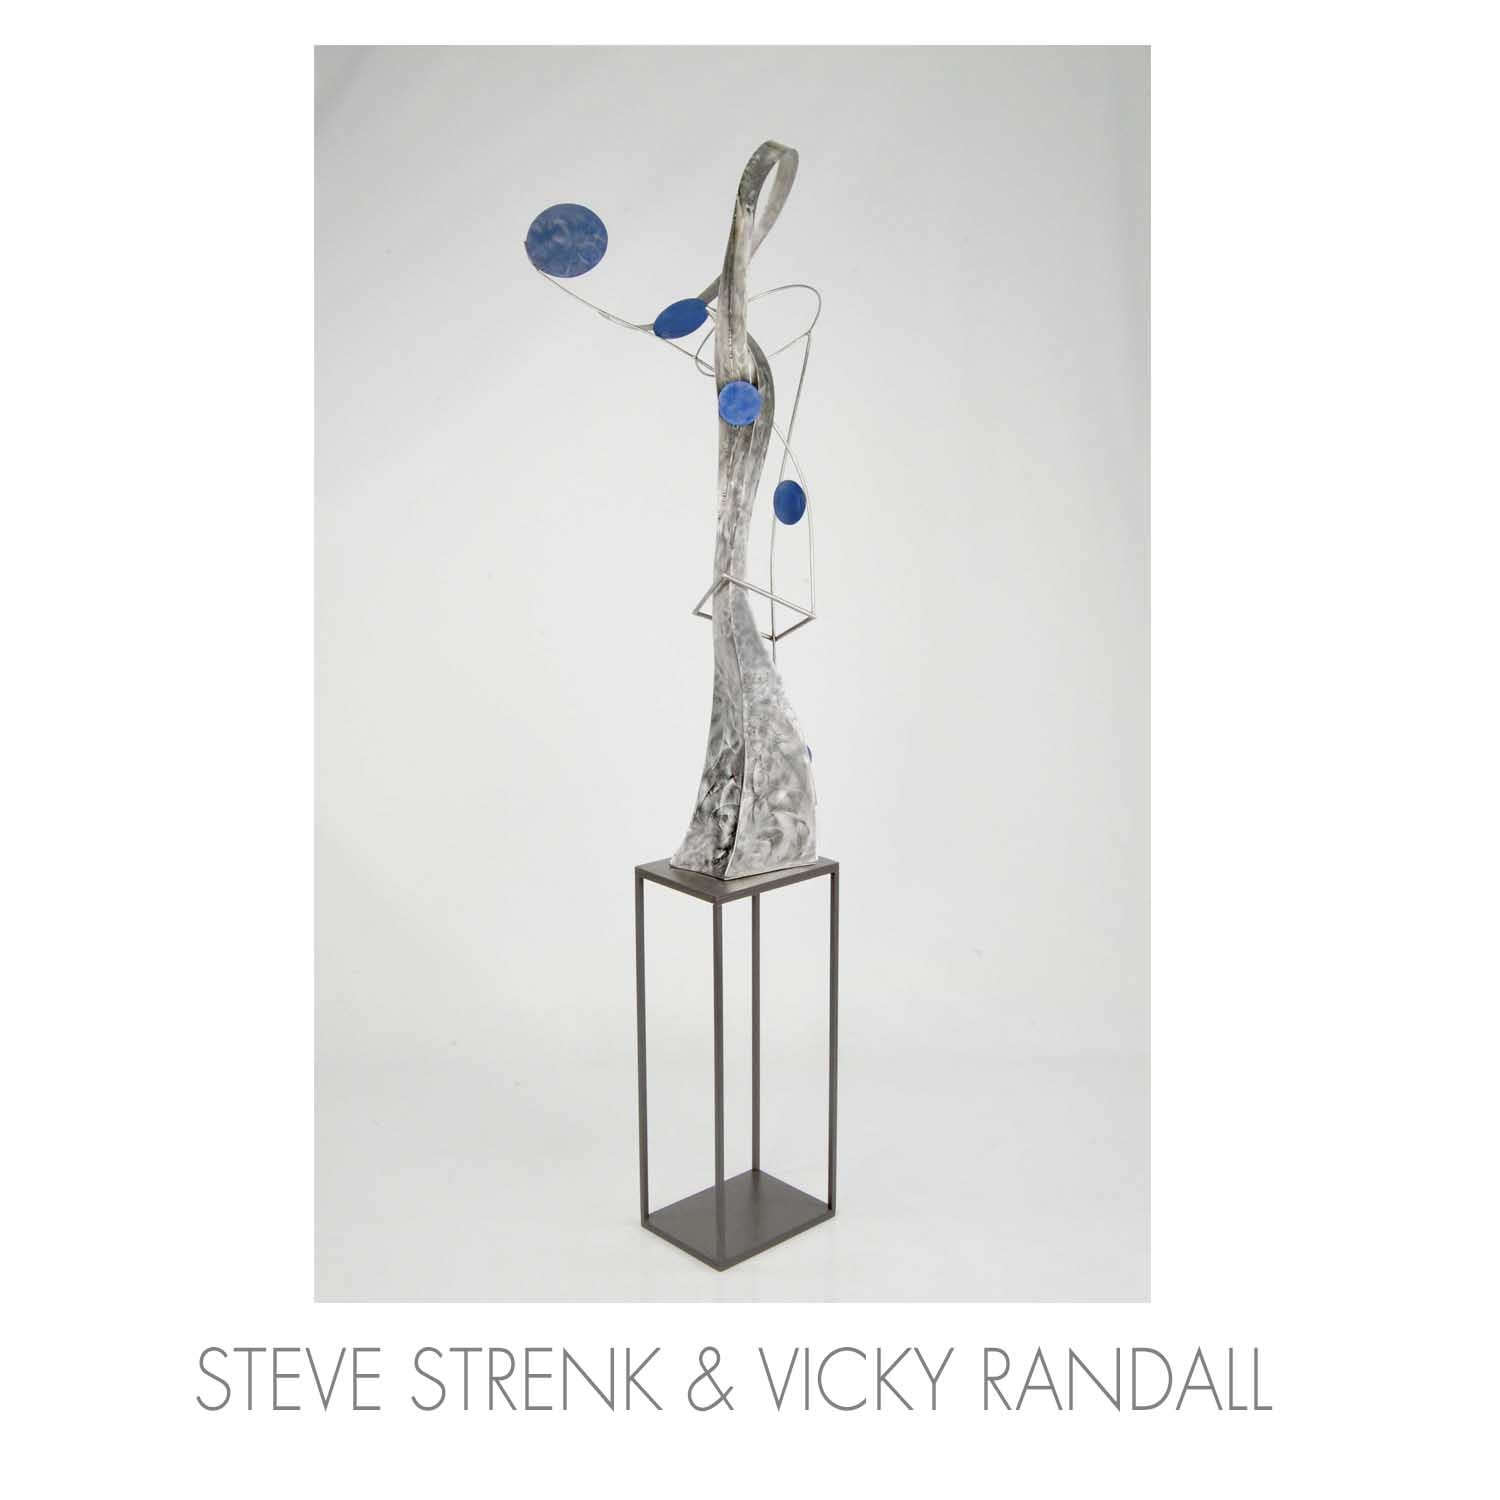 “Sapphire VI” is a collaborative work by sculptors Vicky Randall and Steven Strenk.